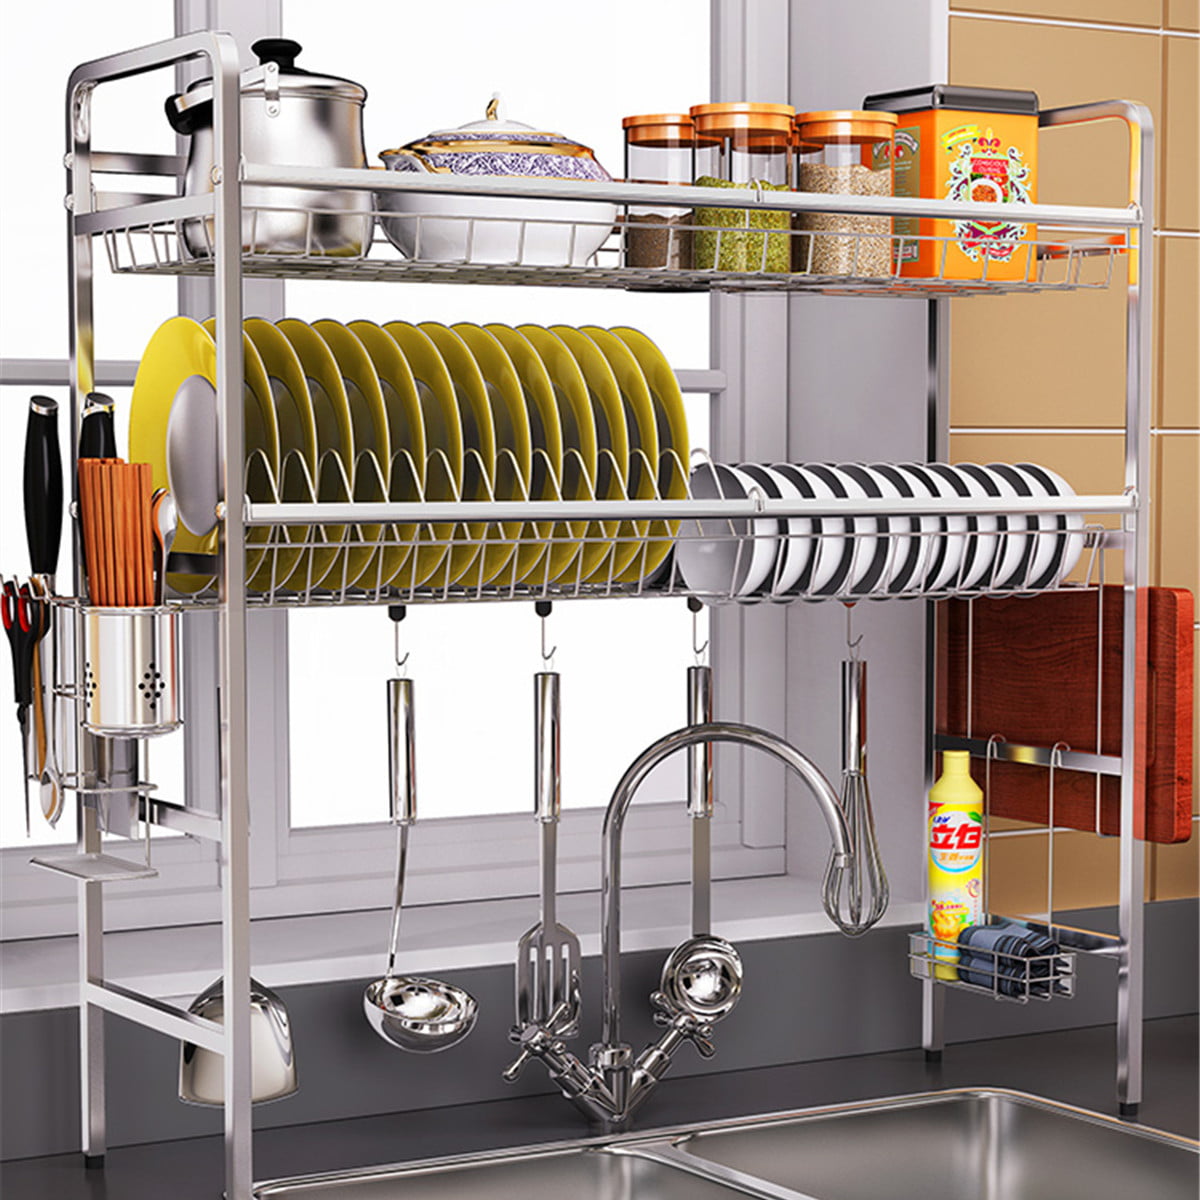 304 Stainless Steel 2 Tier Dish Drying Rack Over Sink Drainer Shelf Dish Drying Racks Stainless Steel